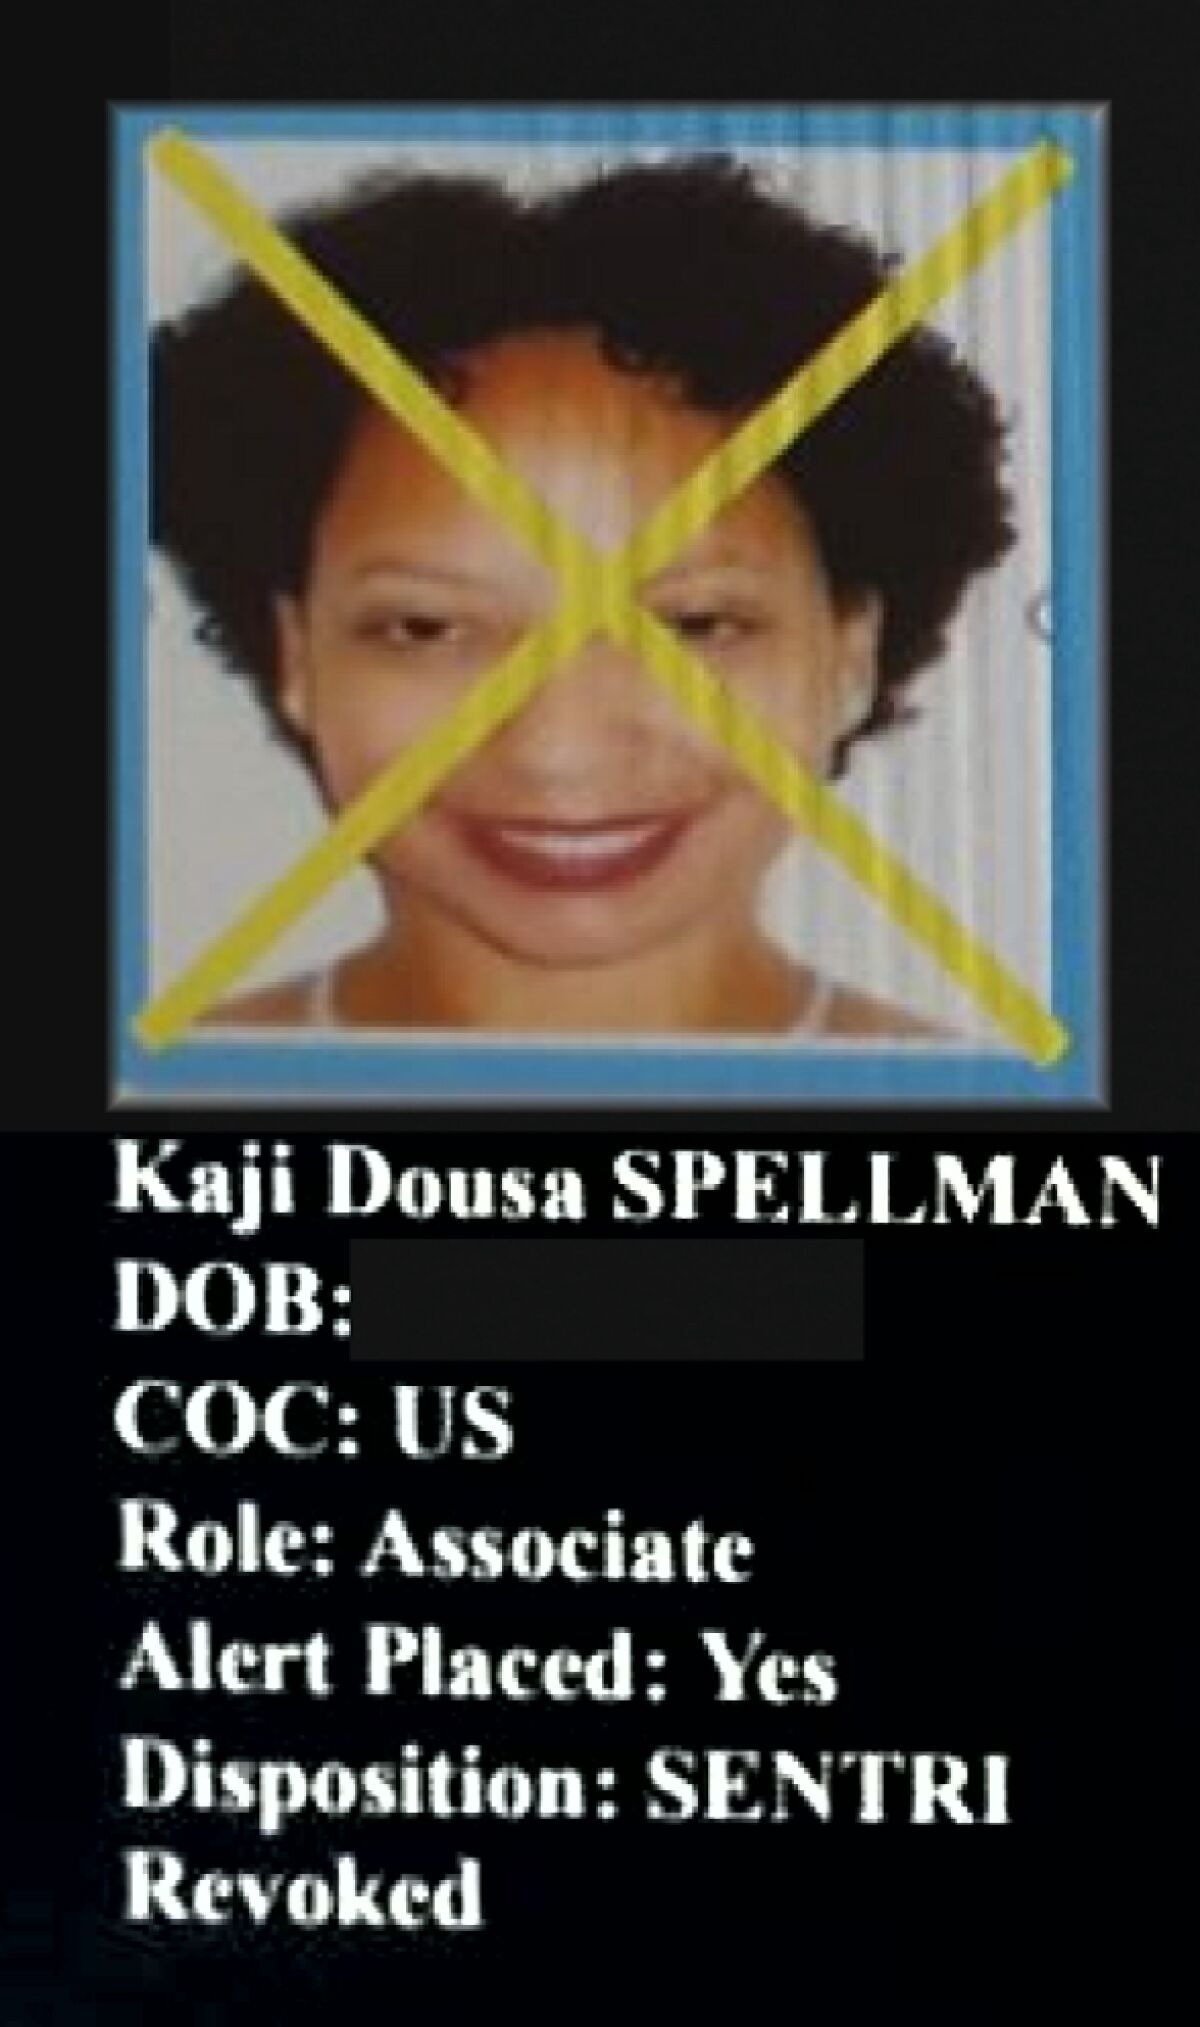 Pastor Kaji Dousa Spellman was included in a government dossier that consisted of people working across the border. 